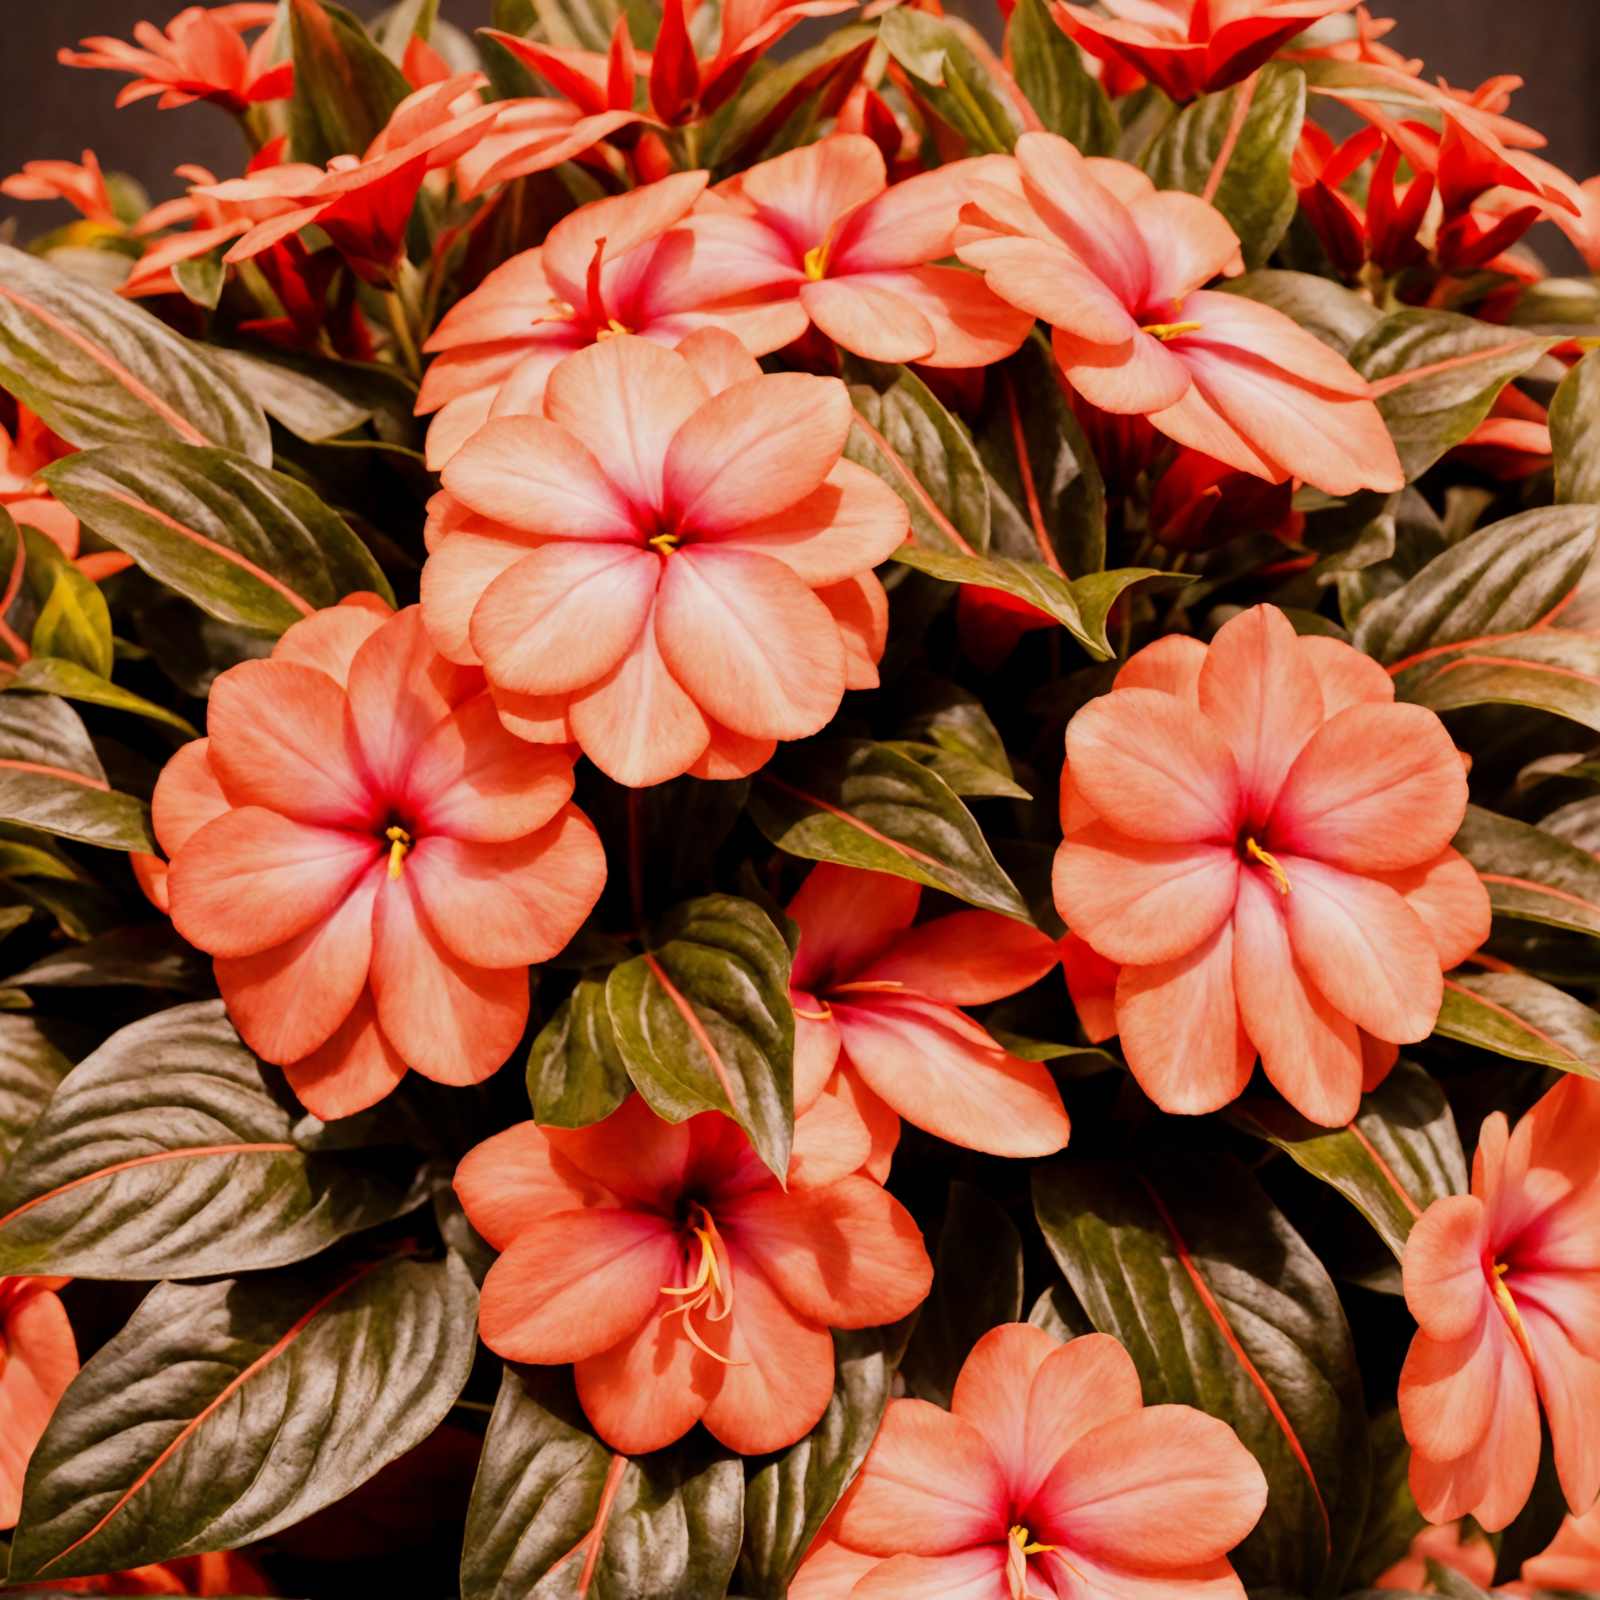 Vivid red Impatiens hawkeri flowers in a planter, with dark foliage backdrop, in clear indoor lighting.